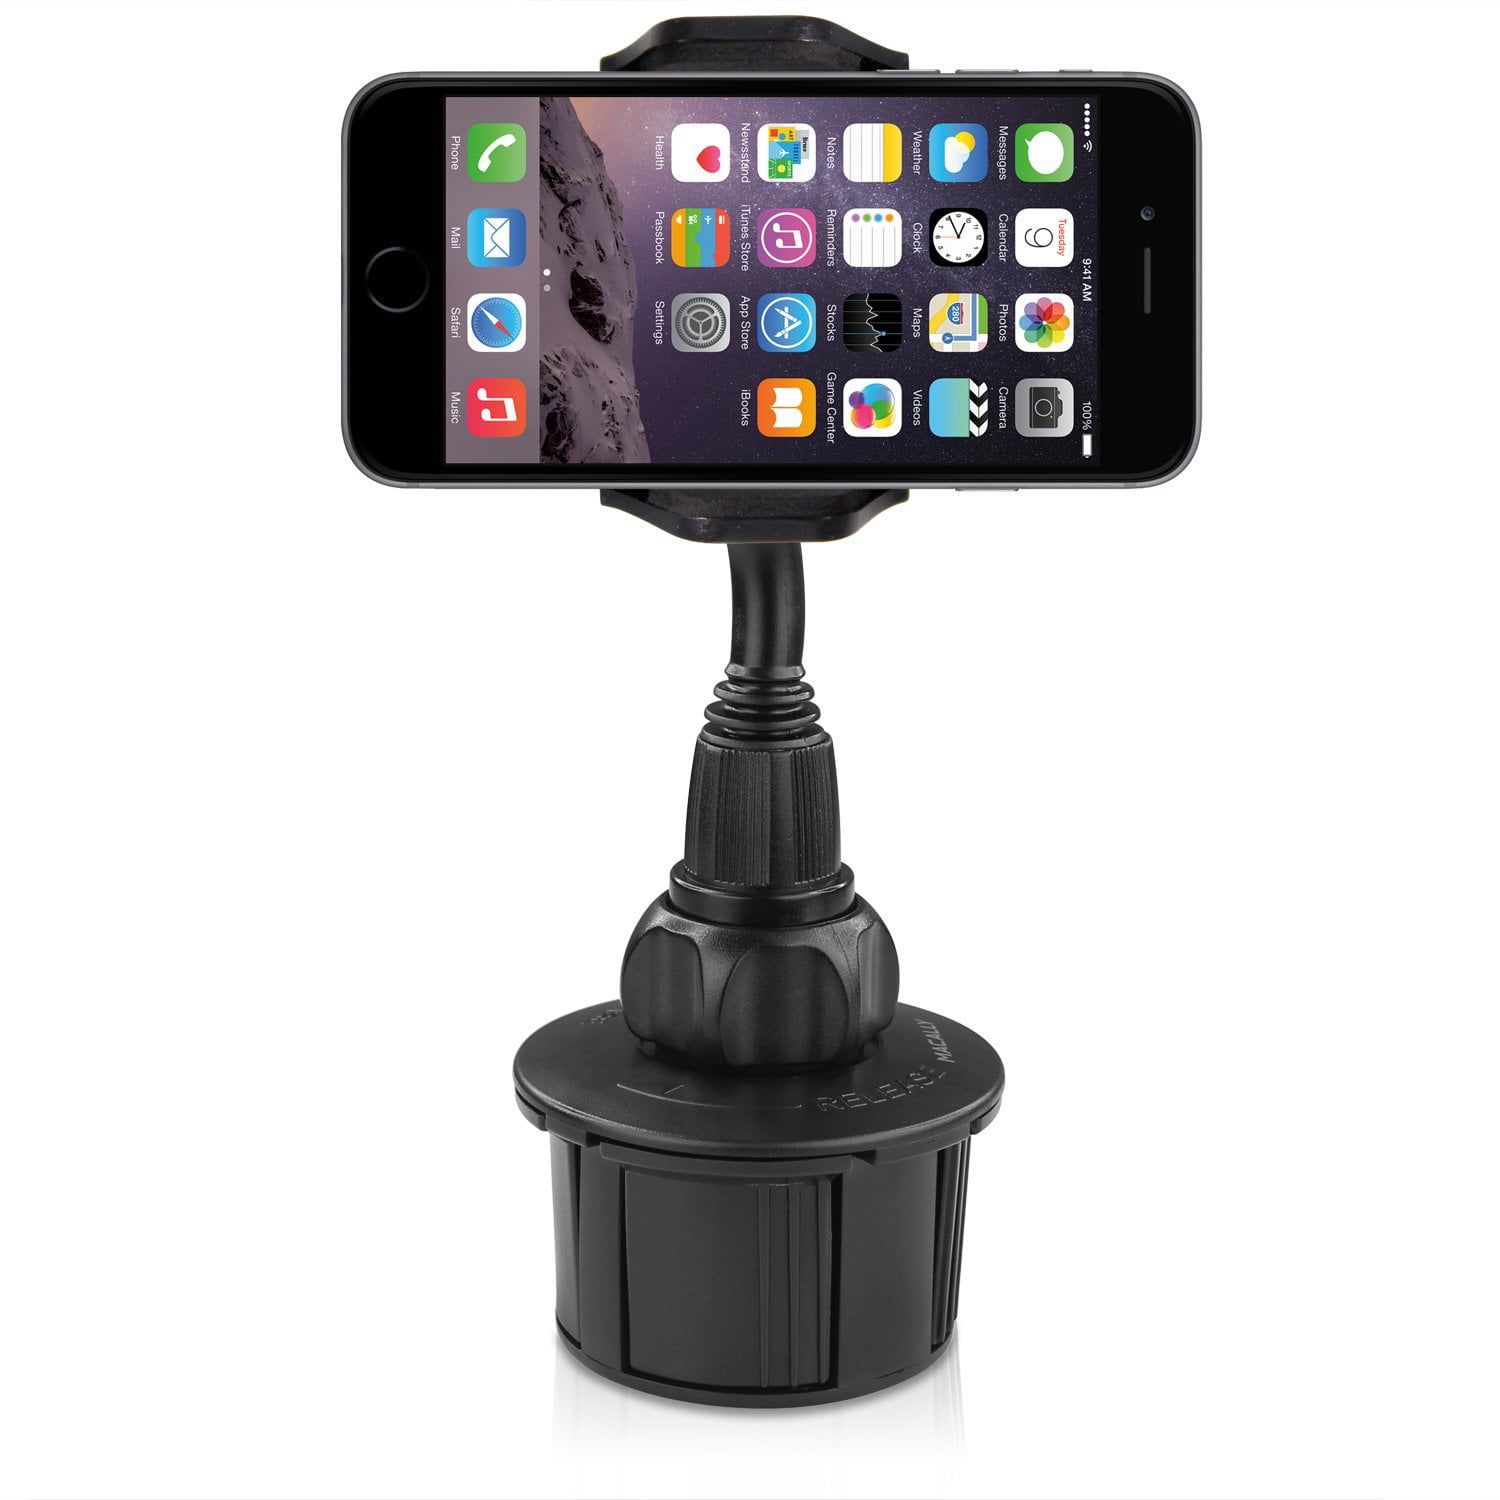 Apple iPhone 6 Plus Galaxy S7 Edge 360° Rotate Smartphone Water Cup Holder Mount 